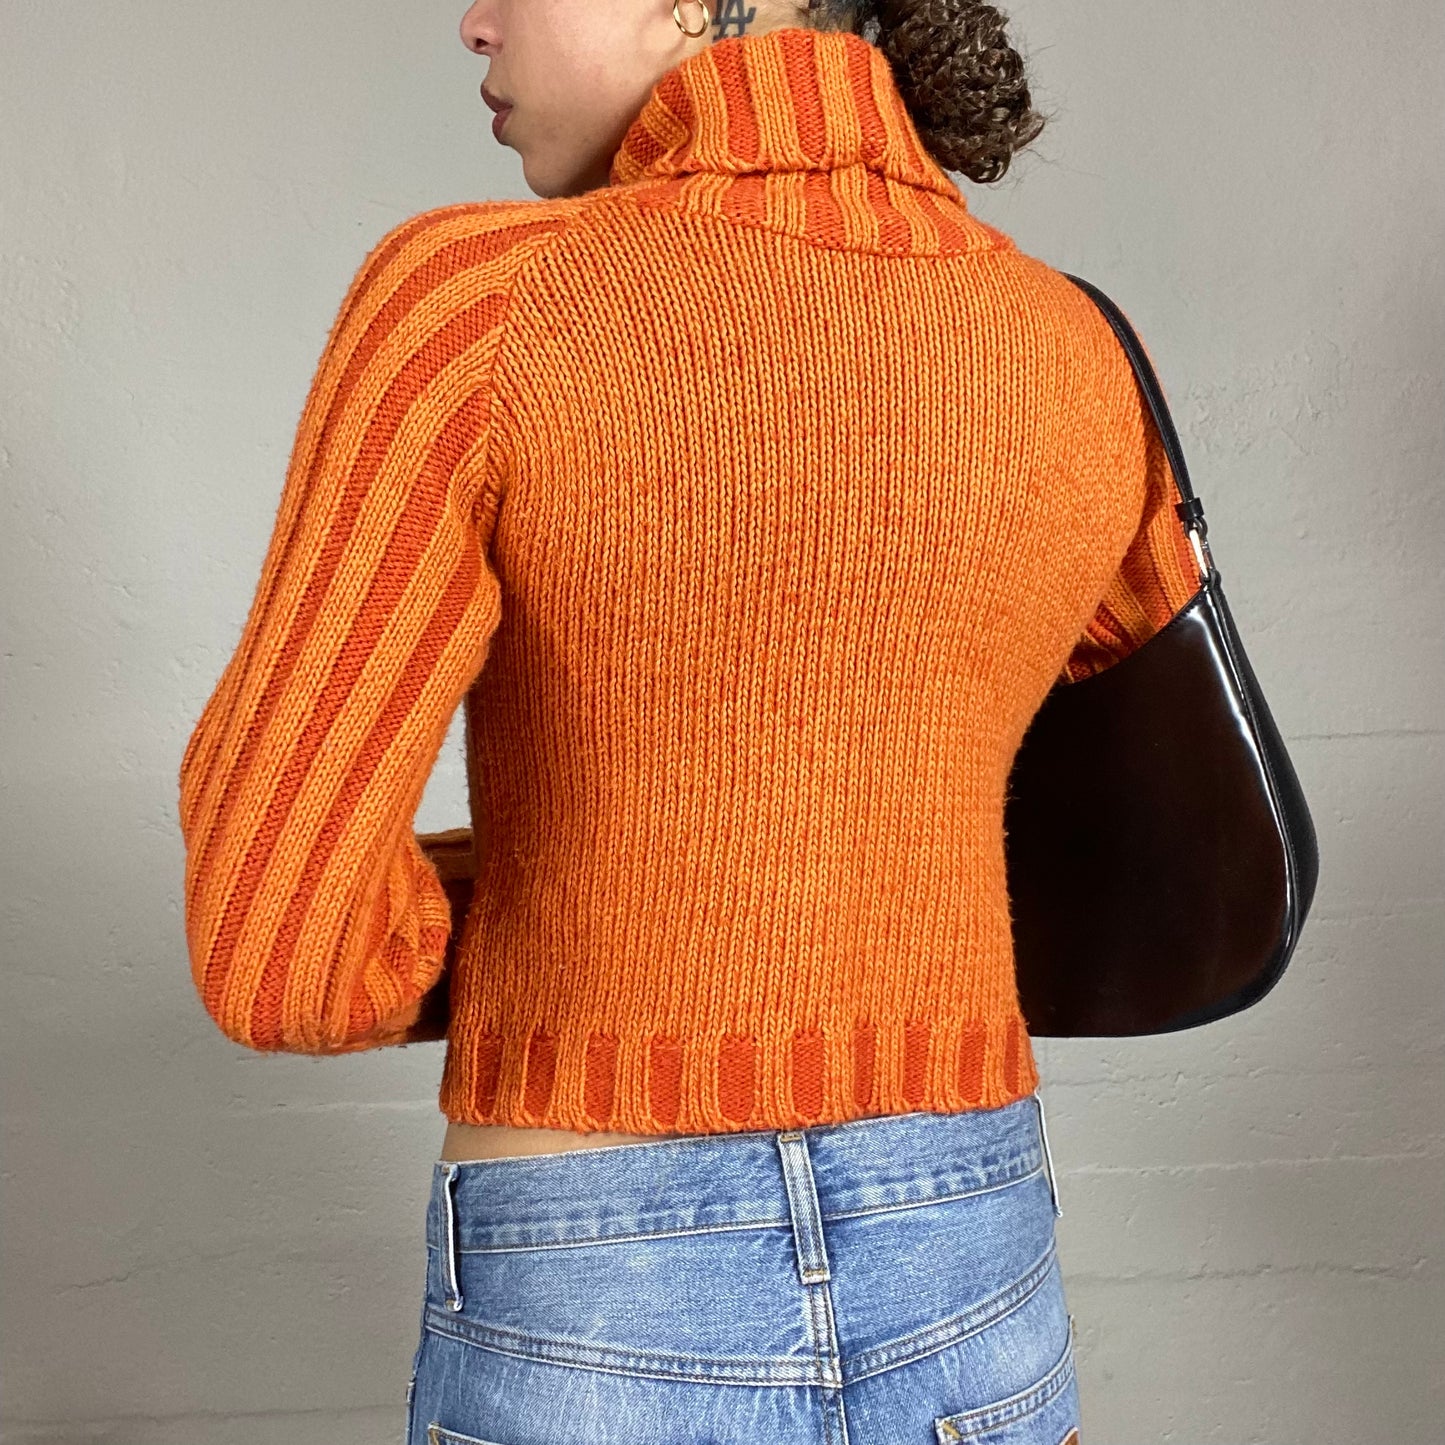 Vintage 2000's Downtown Girl Orange Turtleneck Sweater with Ribbed Knit Detail (S)